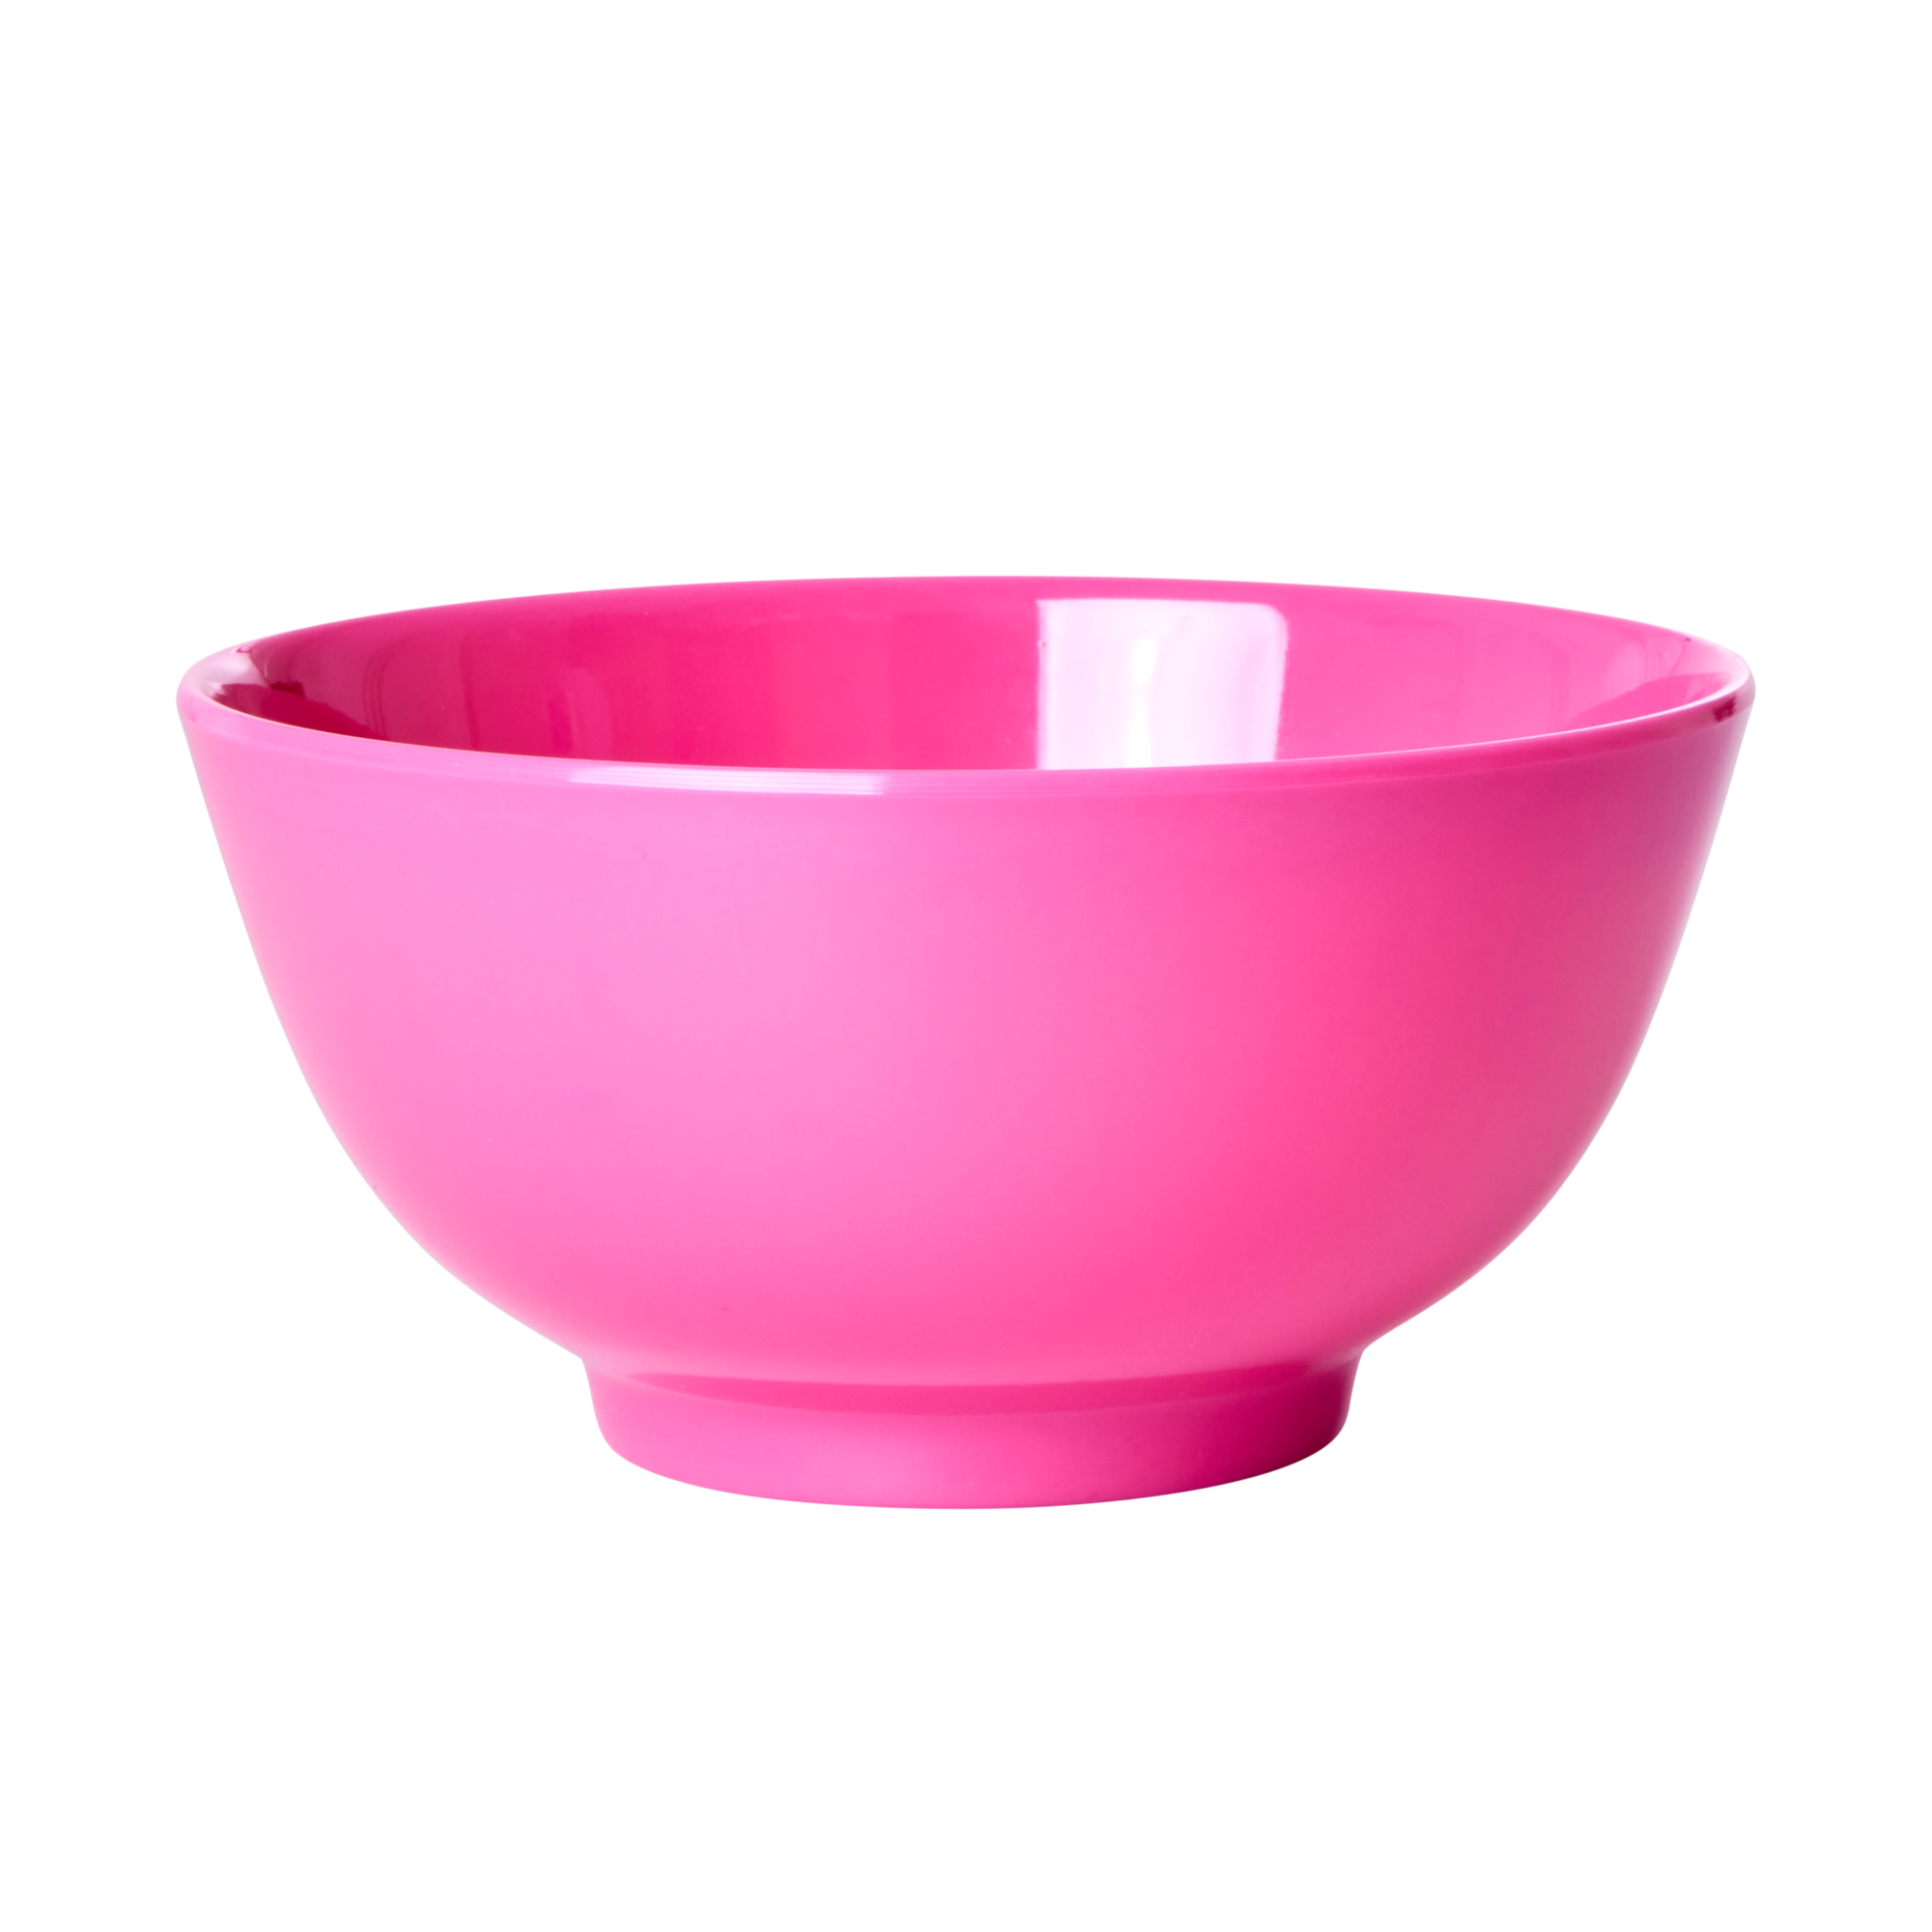 Melamine bowl by Rice by Rice in the color pink